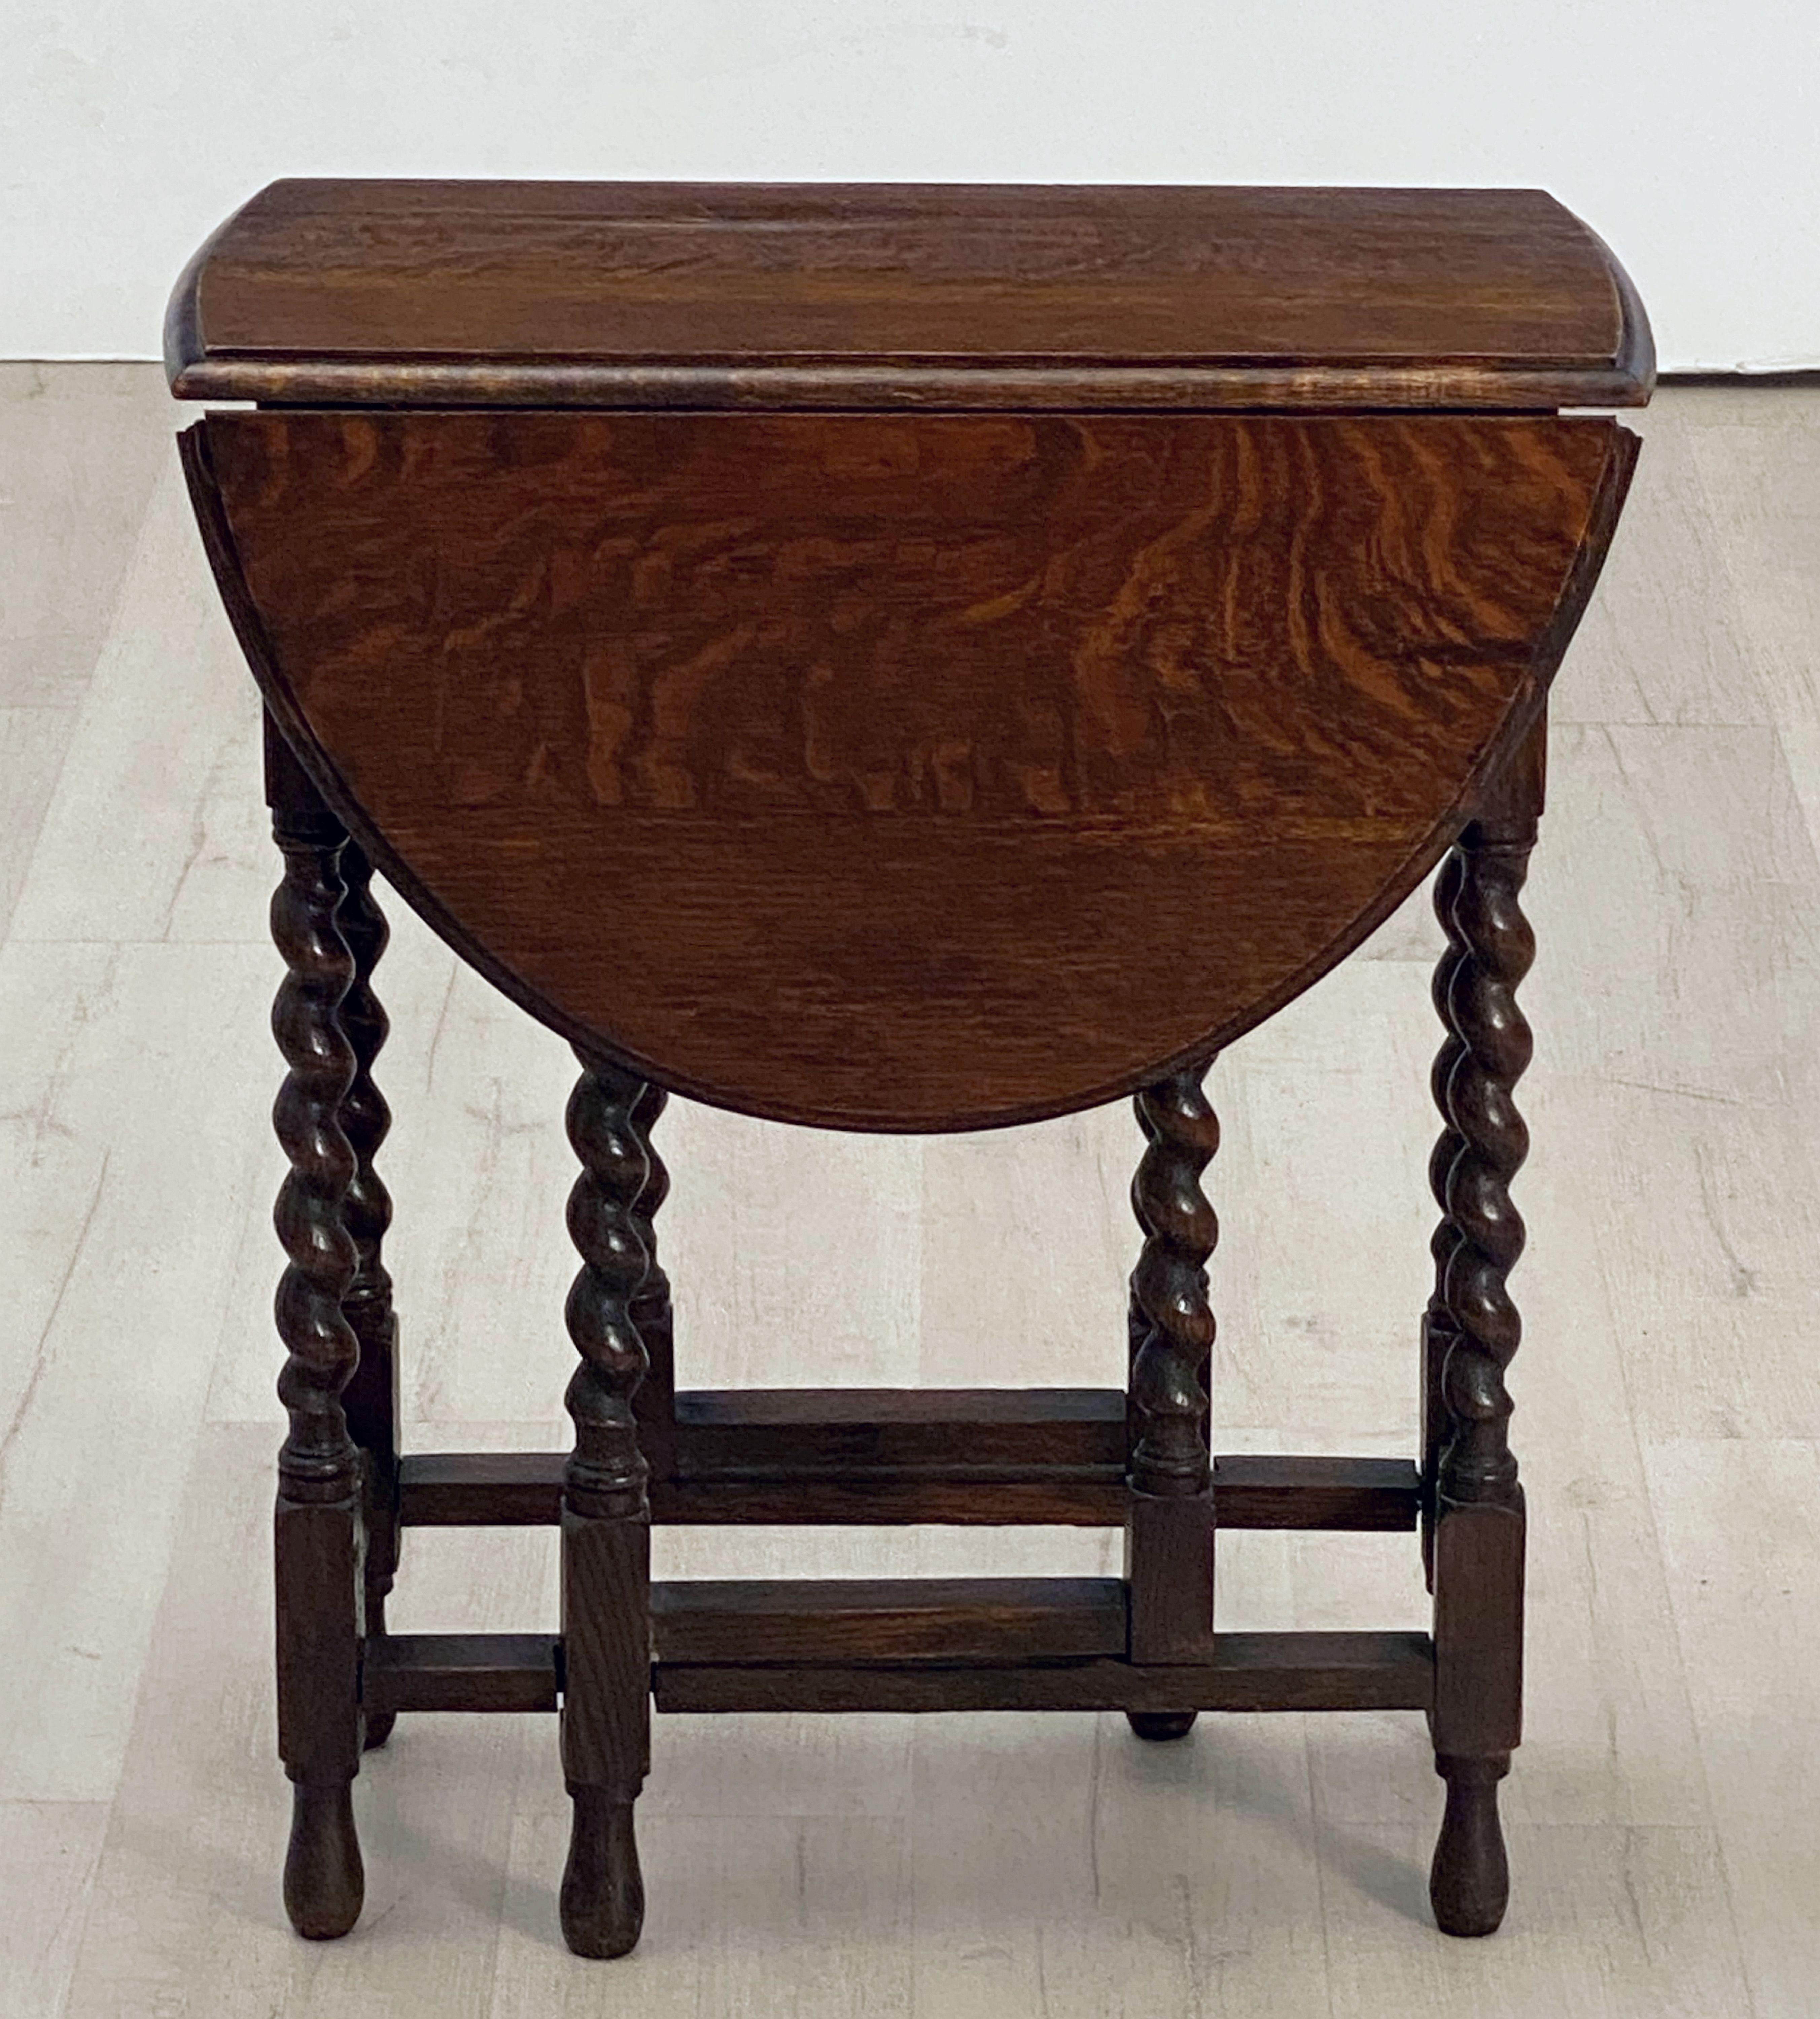 A Classic English drop-leaf gate-leg table of oak, featuring a moulded top with drop-down sides, over a stretcher of eight barley-twist supports.
Opens to an oval top.

Dimensions: 

Height 28 3/4 inches 
Width 24 1/2 inches 
Depth (closed)